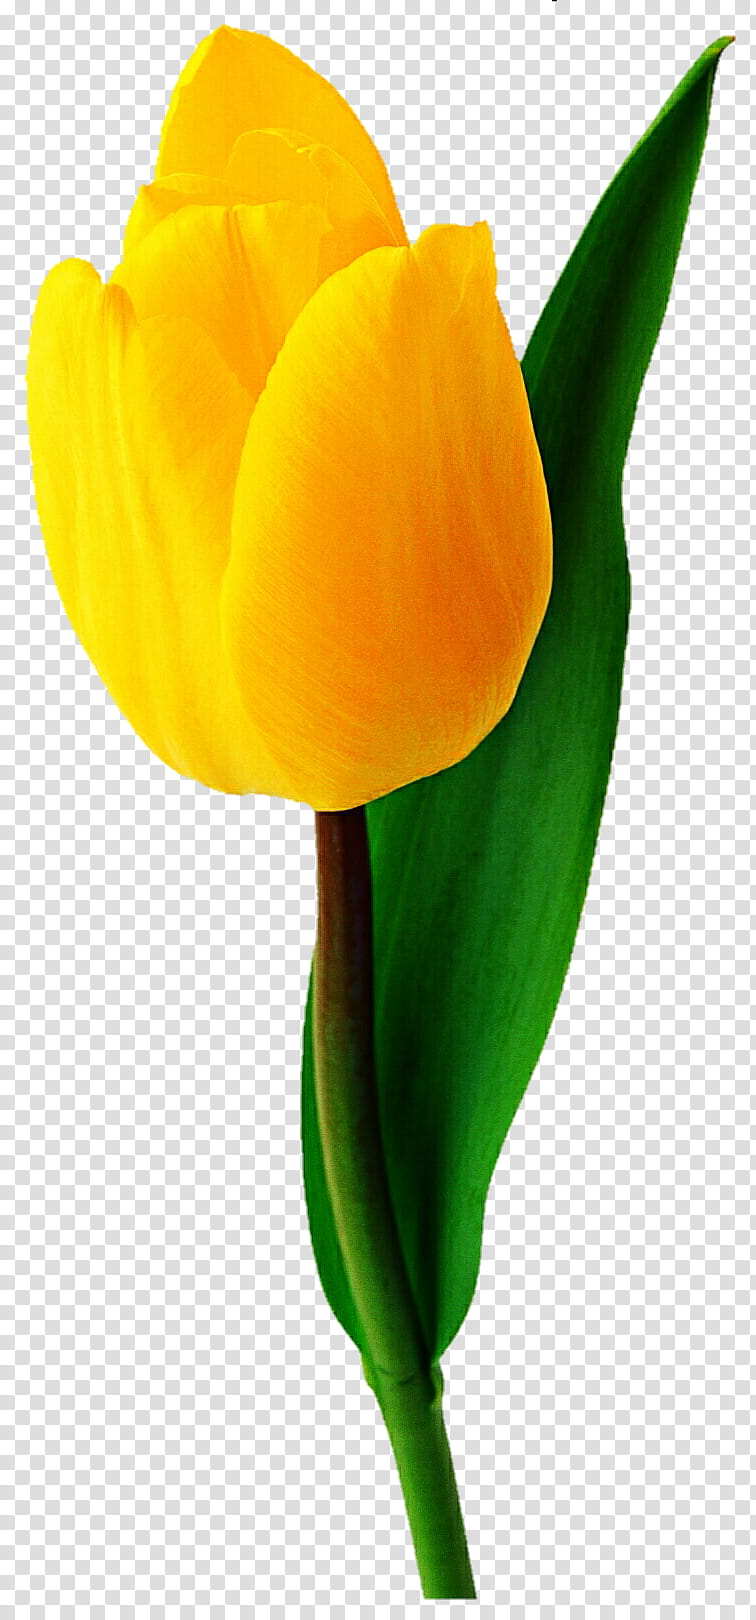 Chiffon Yellow Tulip transparent background PNG clipart.